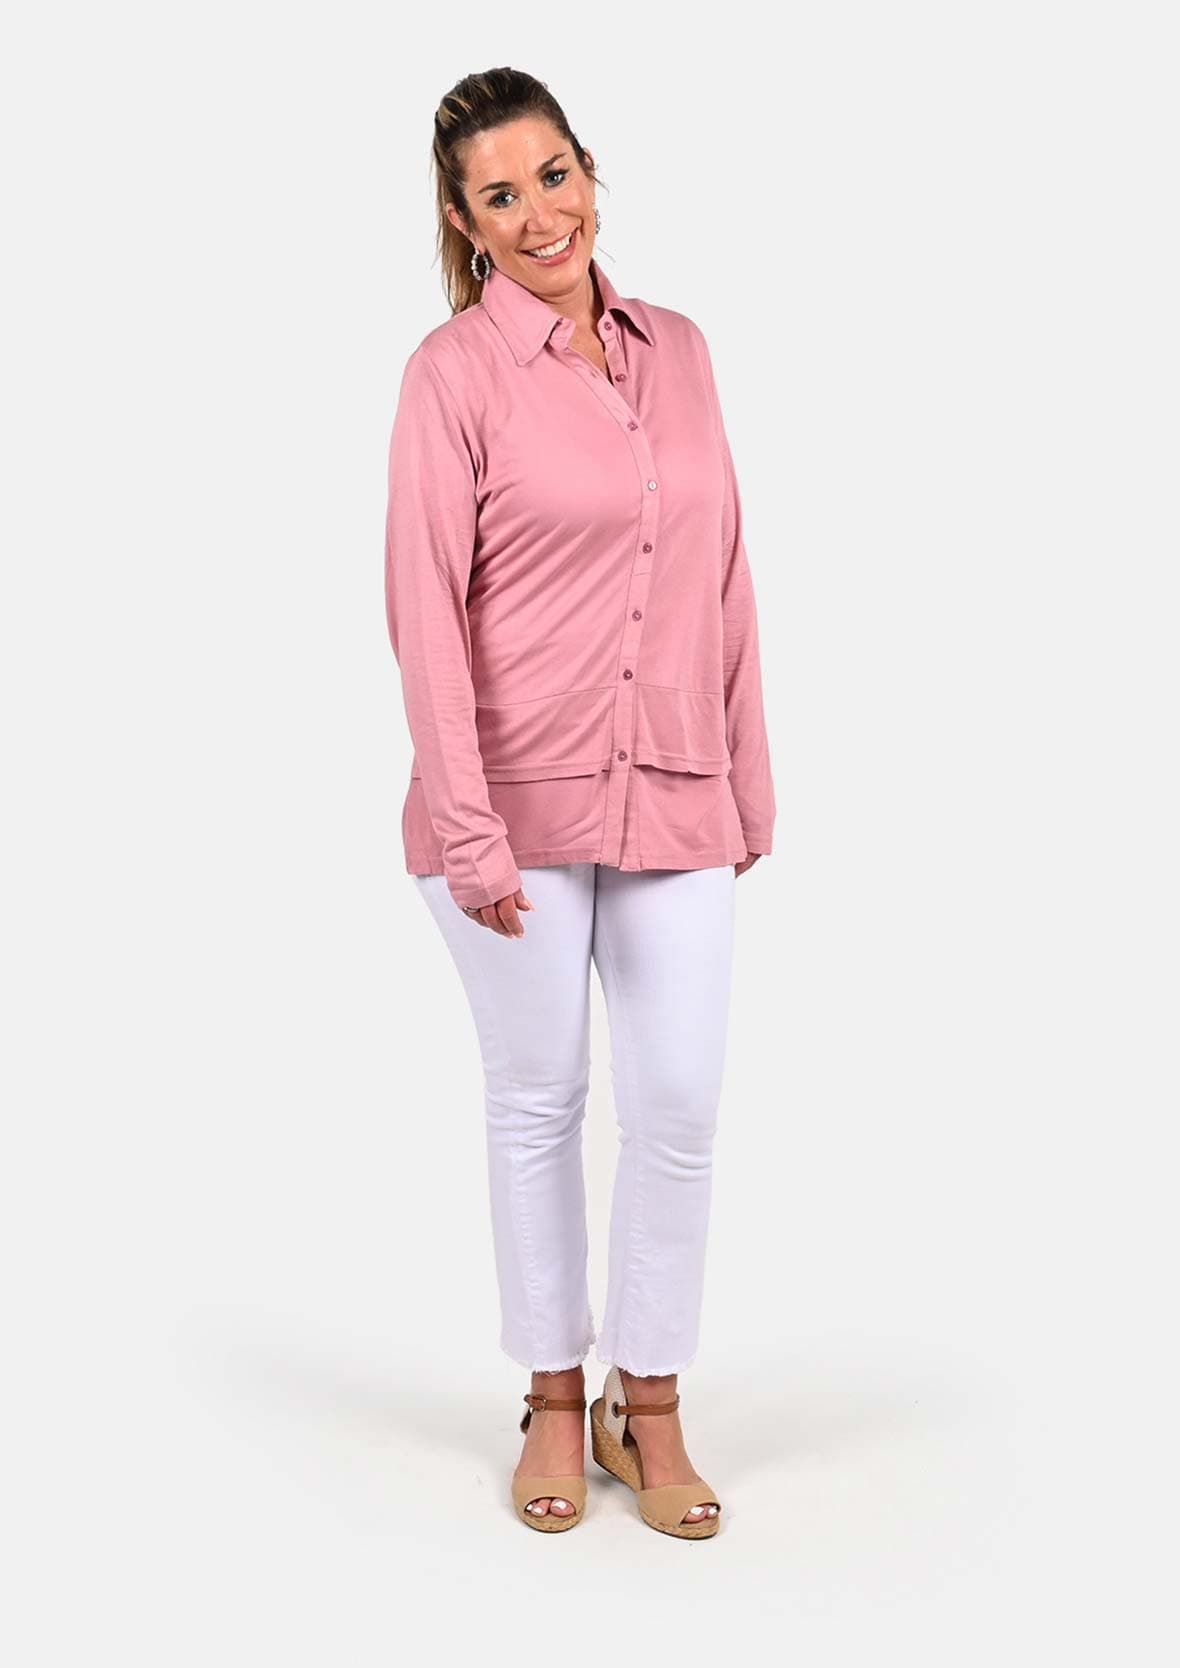 lady wearing classic collared button-front pink shirt #color_Rouge Pink